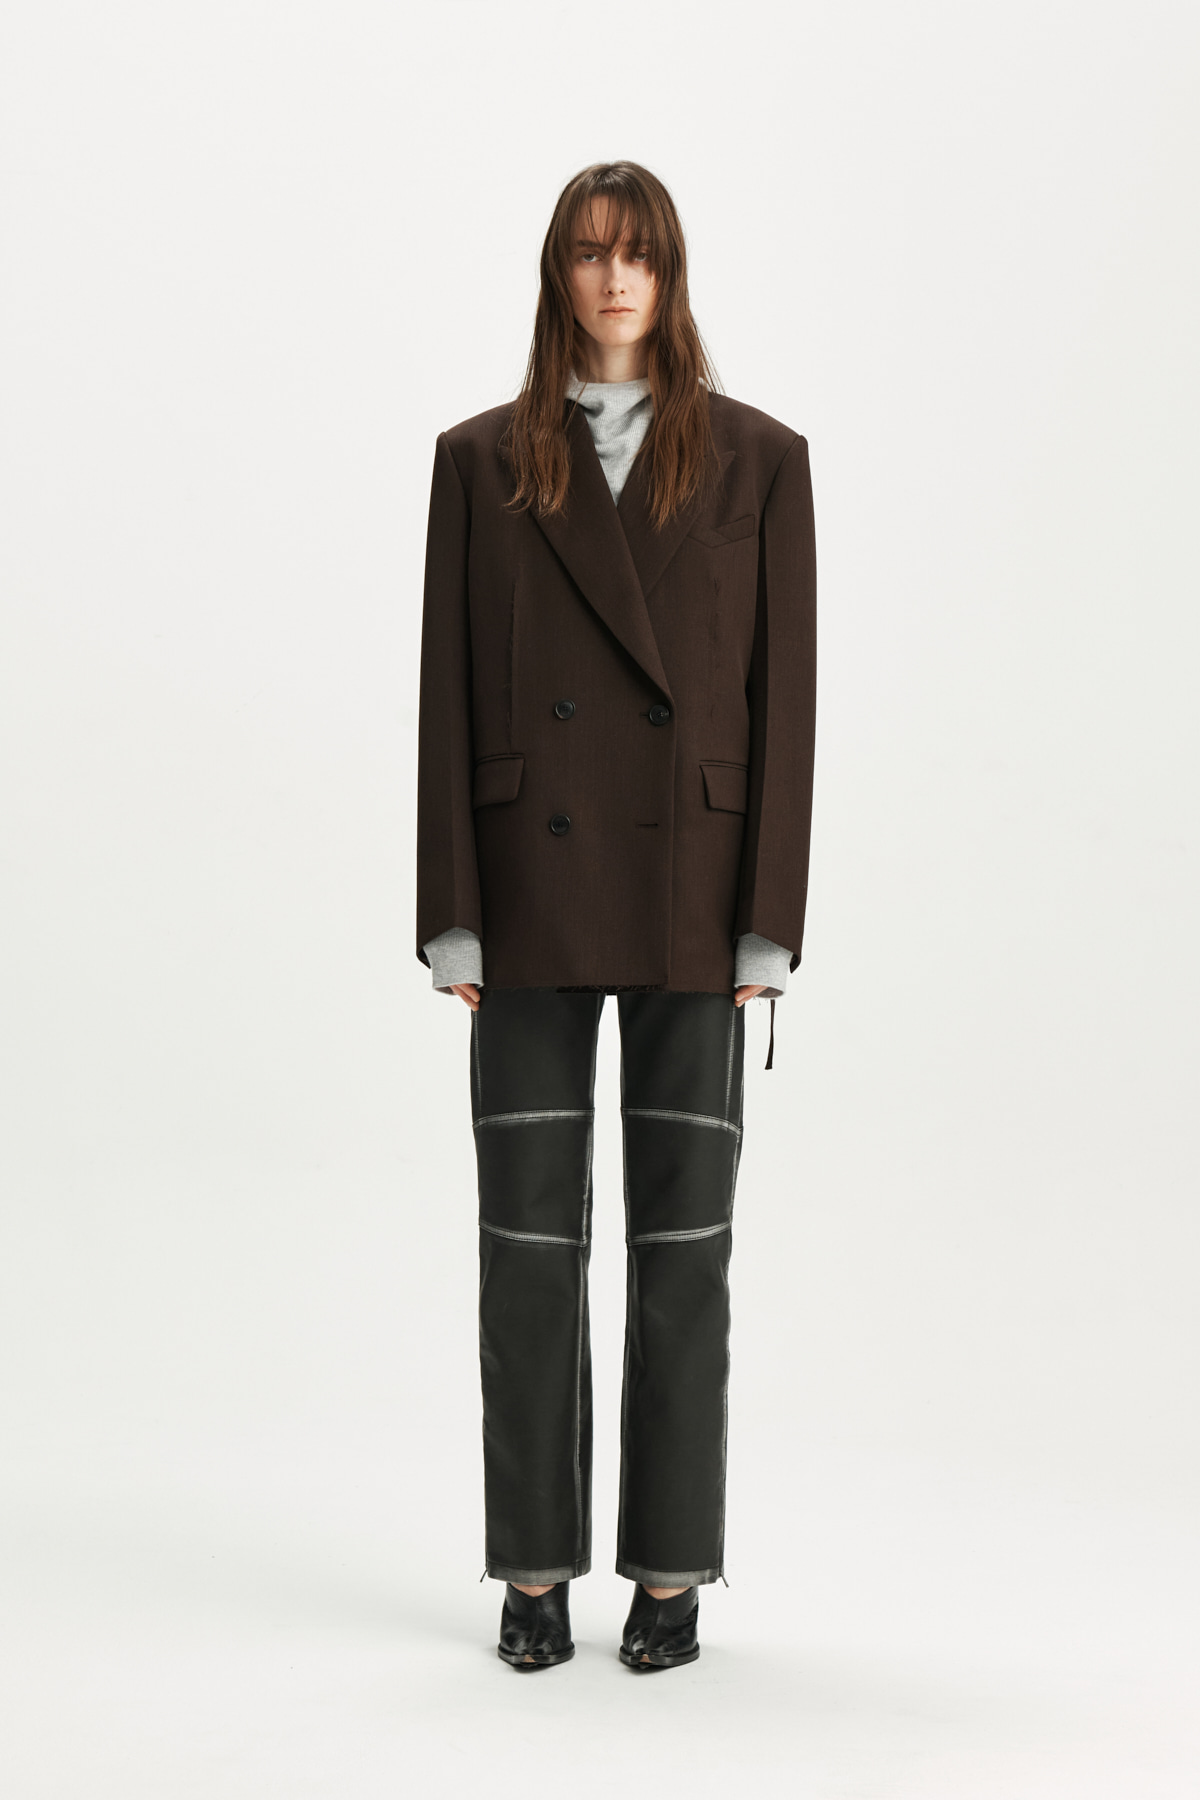 BELTED DOUBLE JACKET IN BROWN